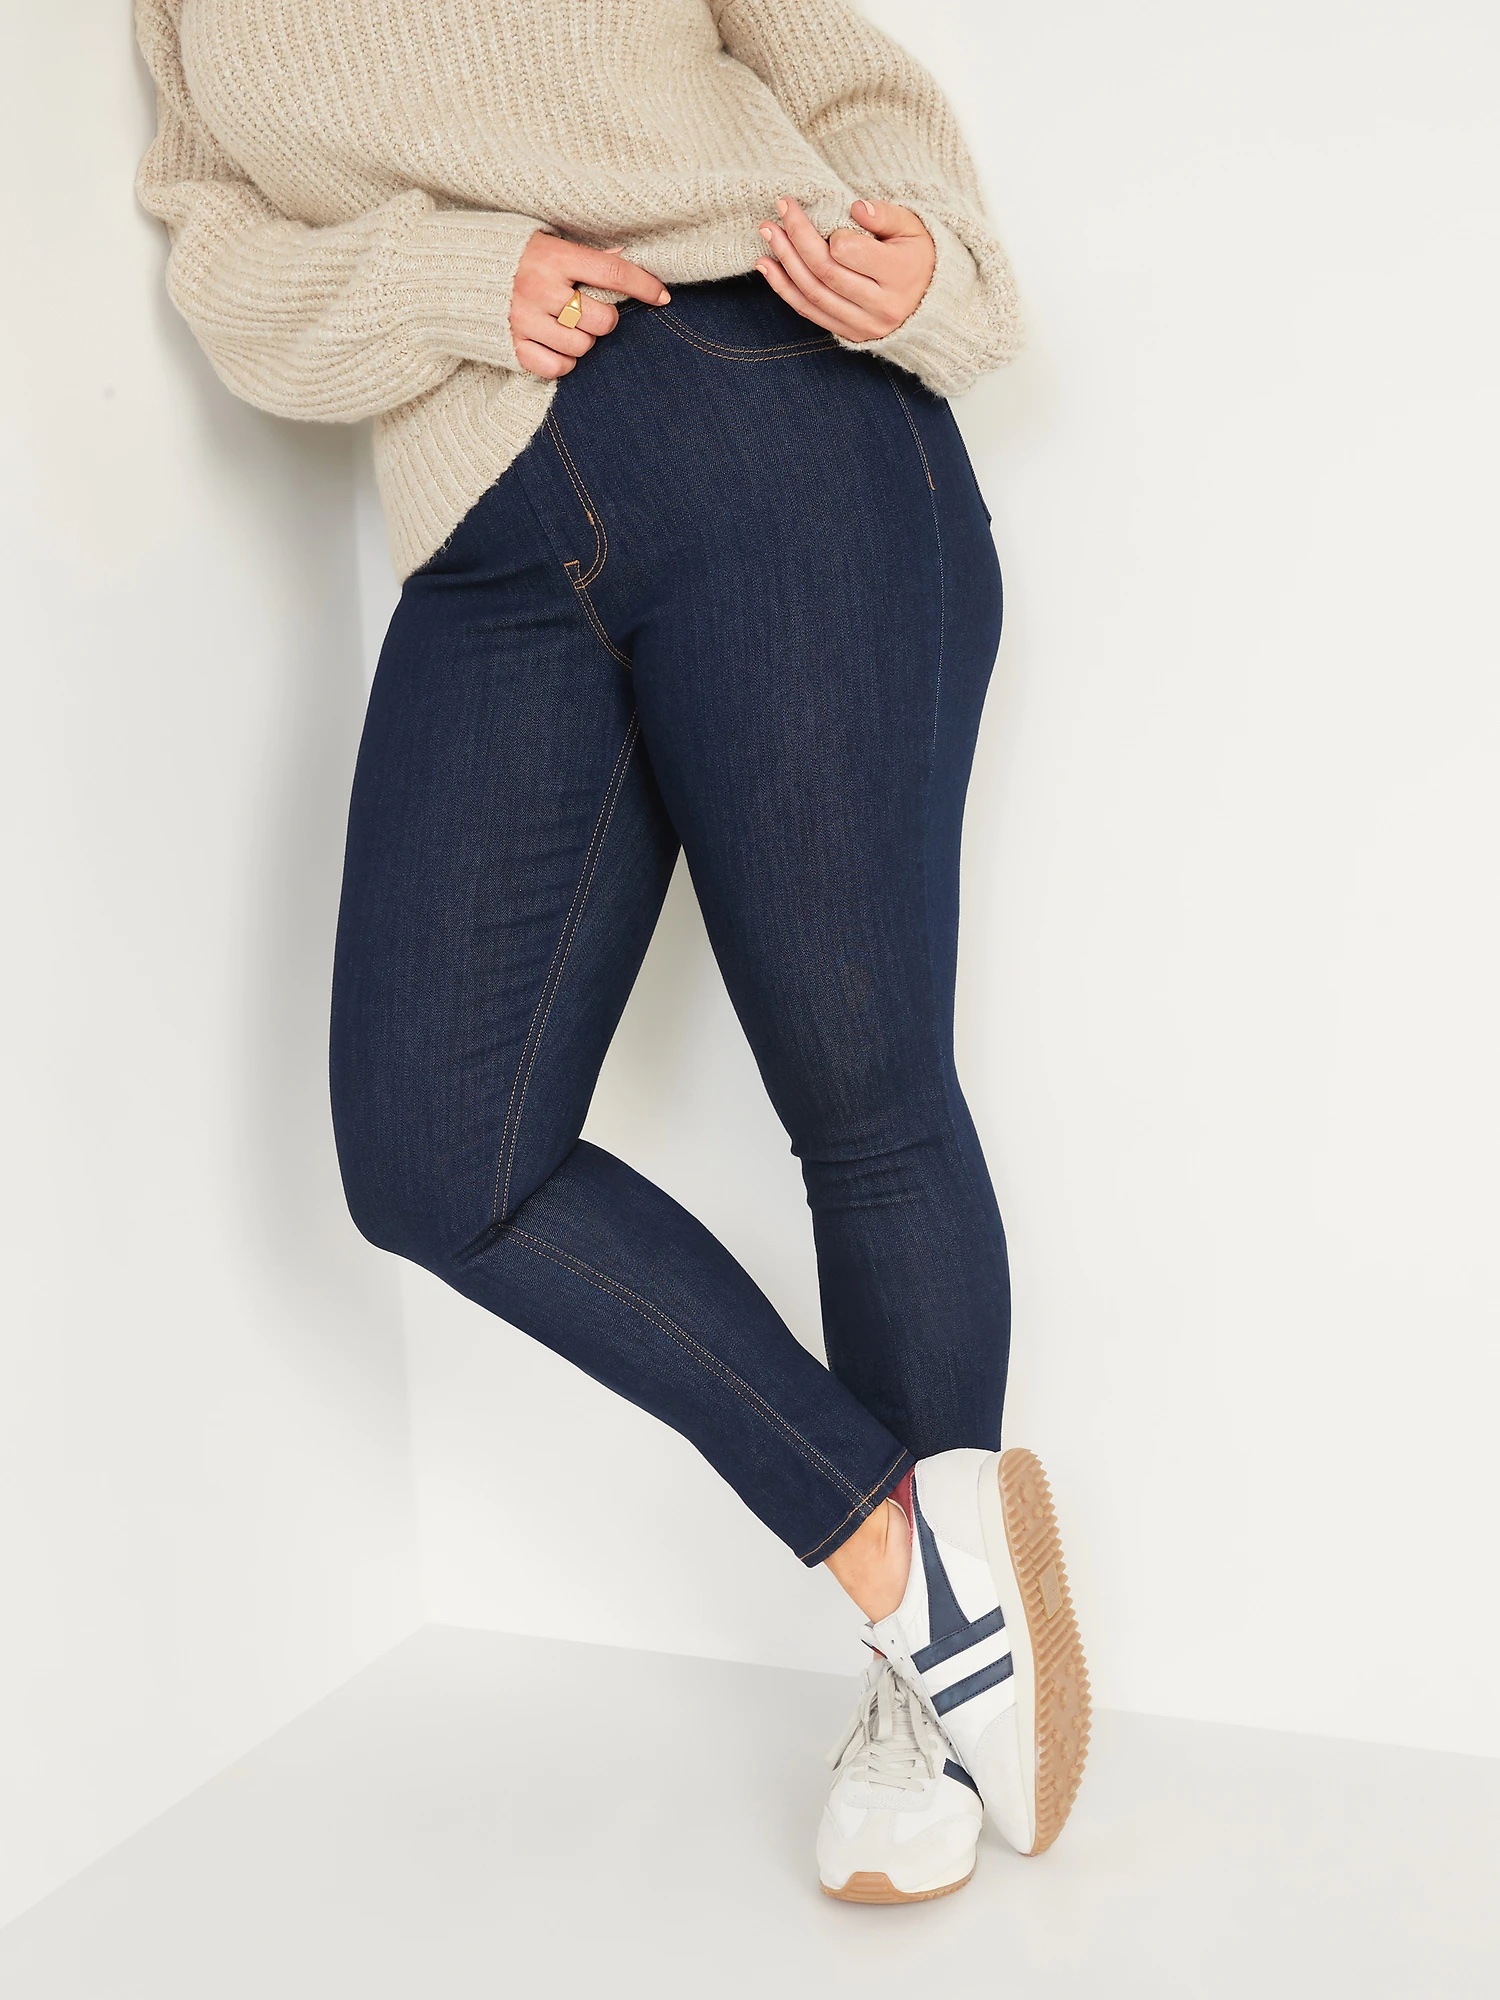 14 of the Best Jeggings That Look Like Jeans | Well+Good